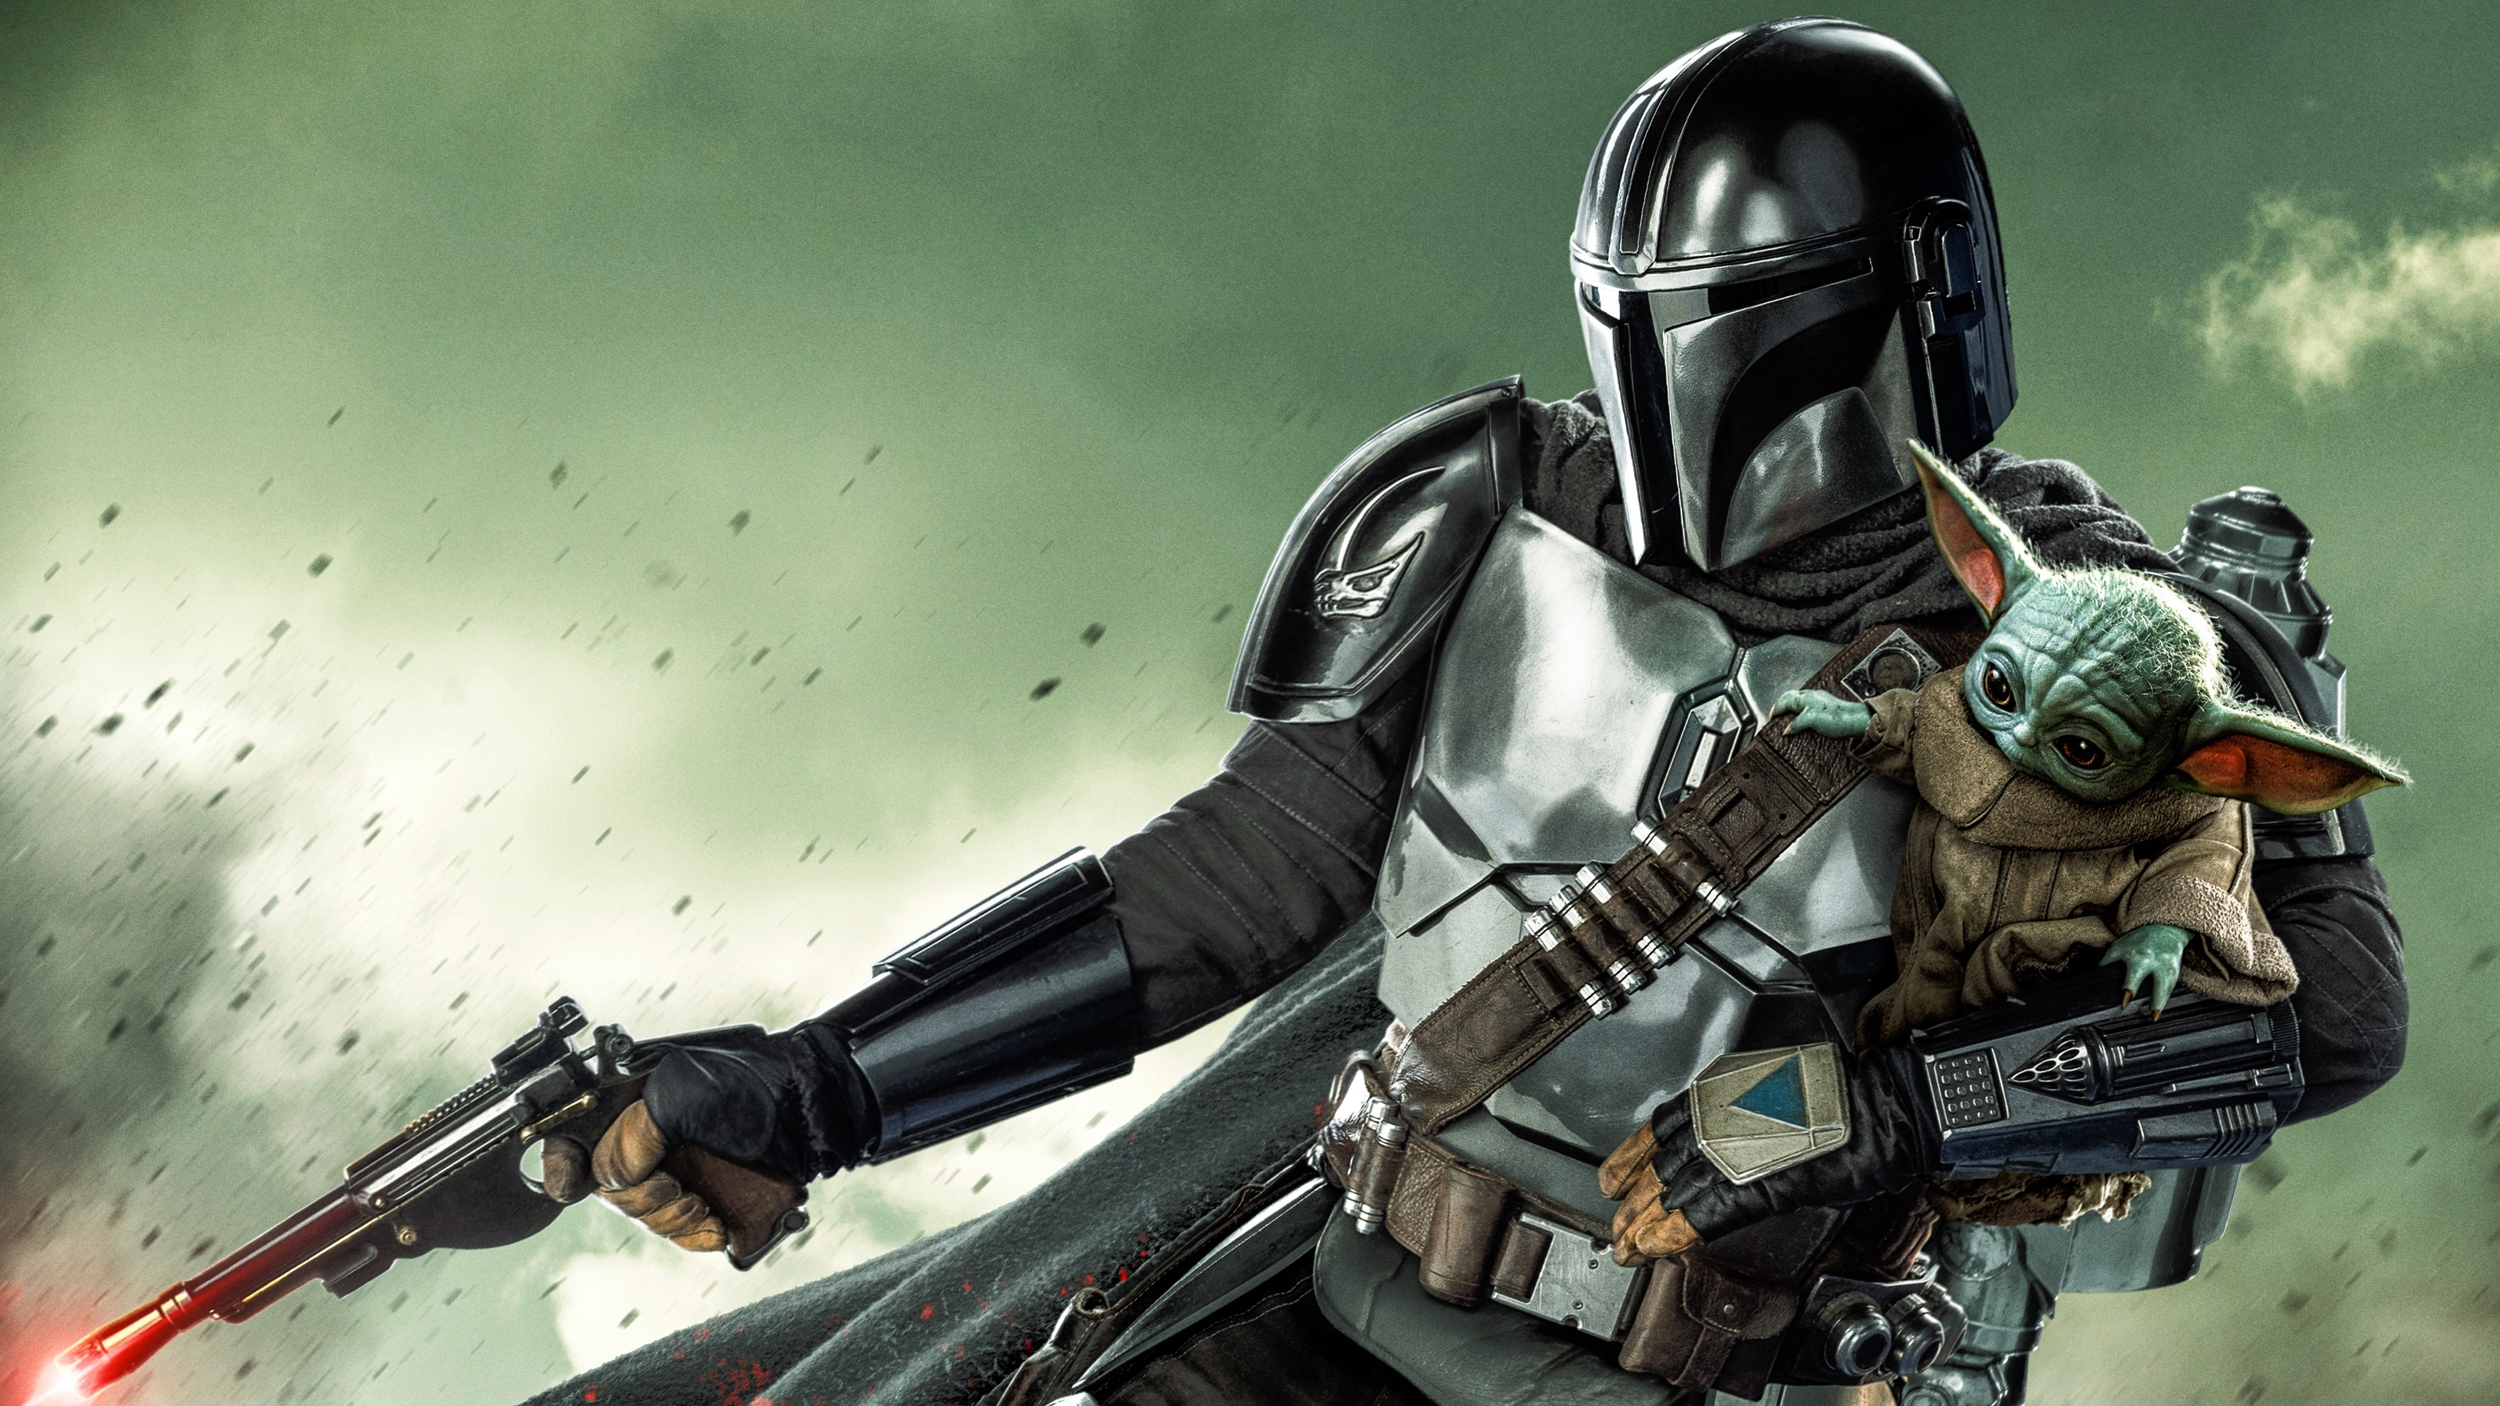 220+ The Mandalorian HD Wallpapers and Backgrounds